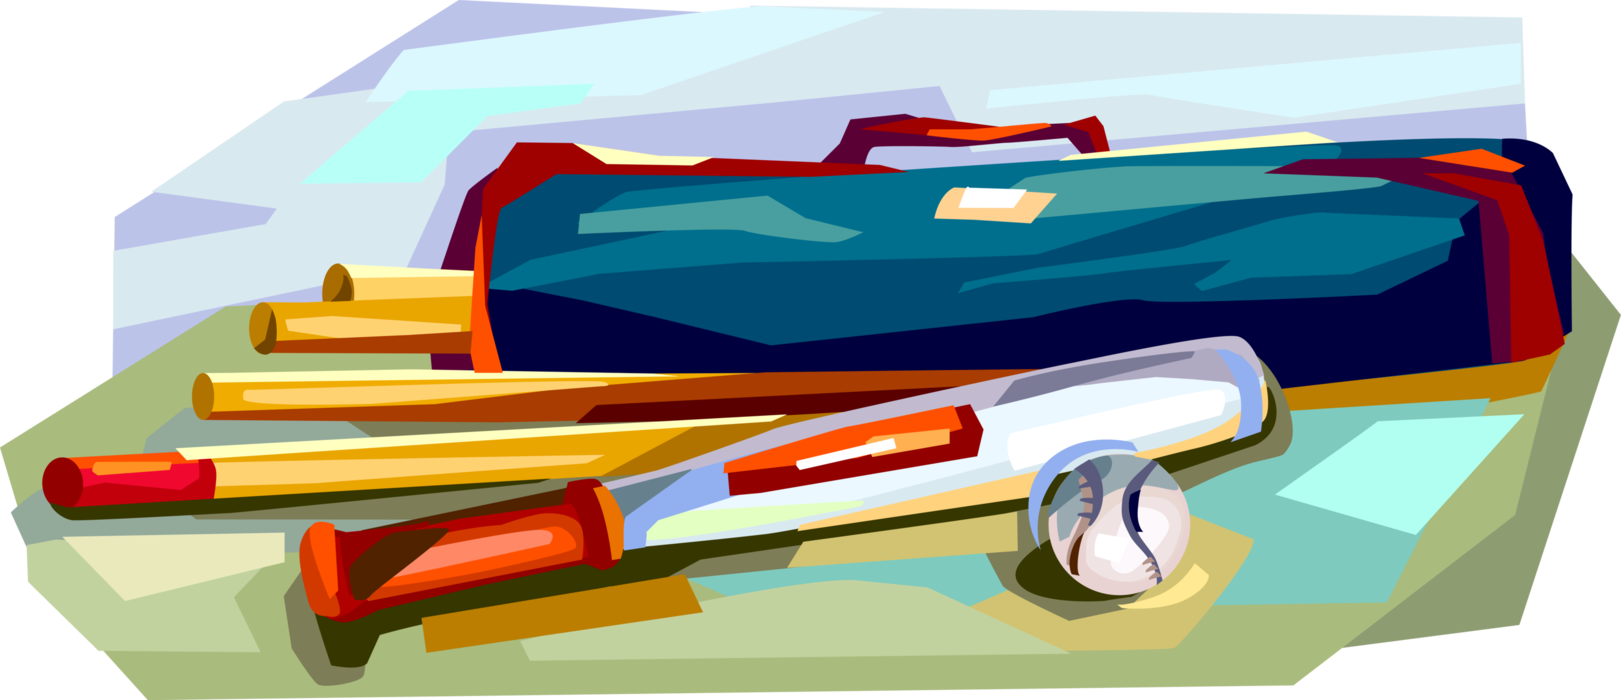 Vector Illustration of Sport of Rounders Bat-and-Ball Game Equipment